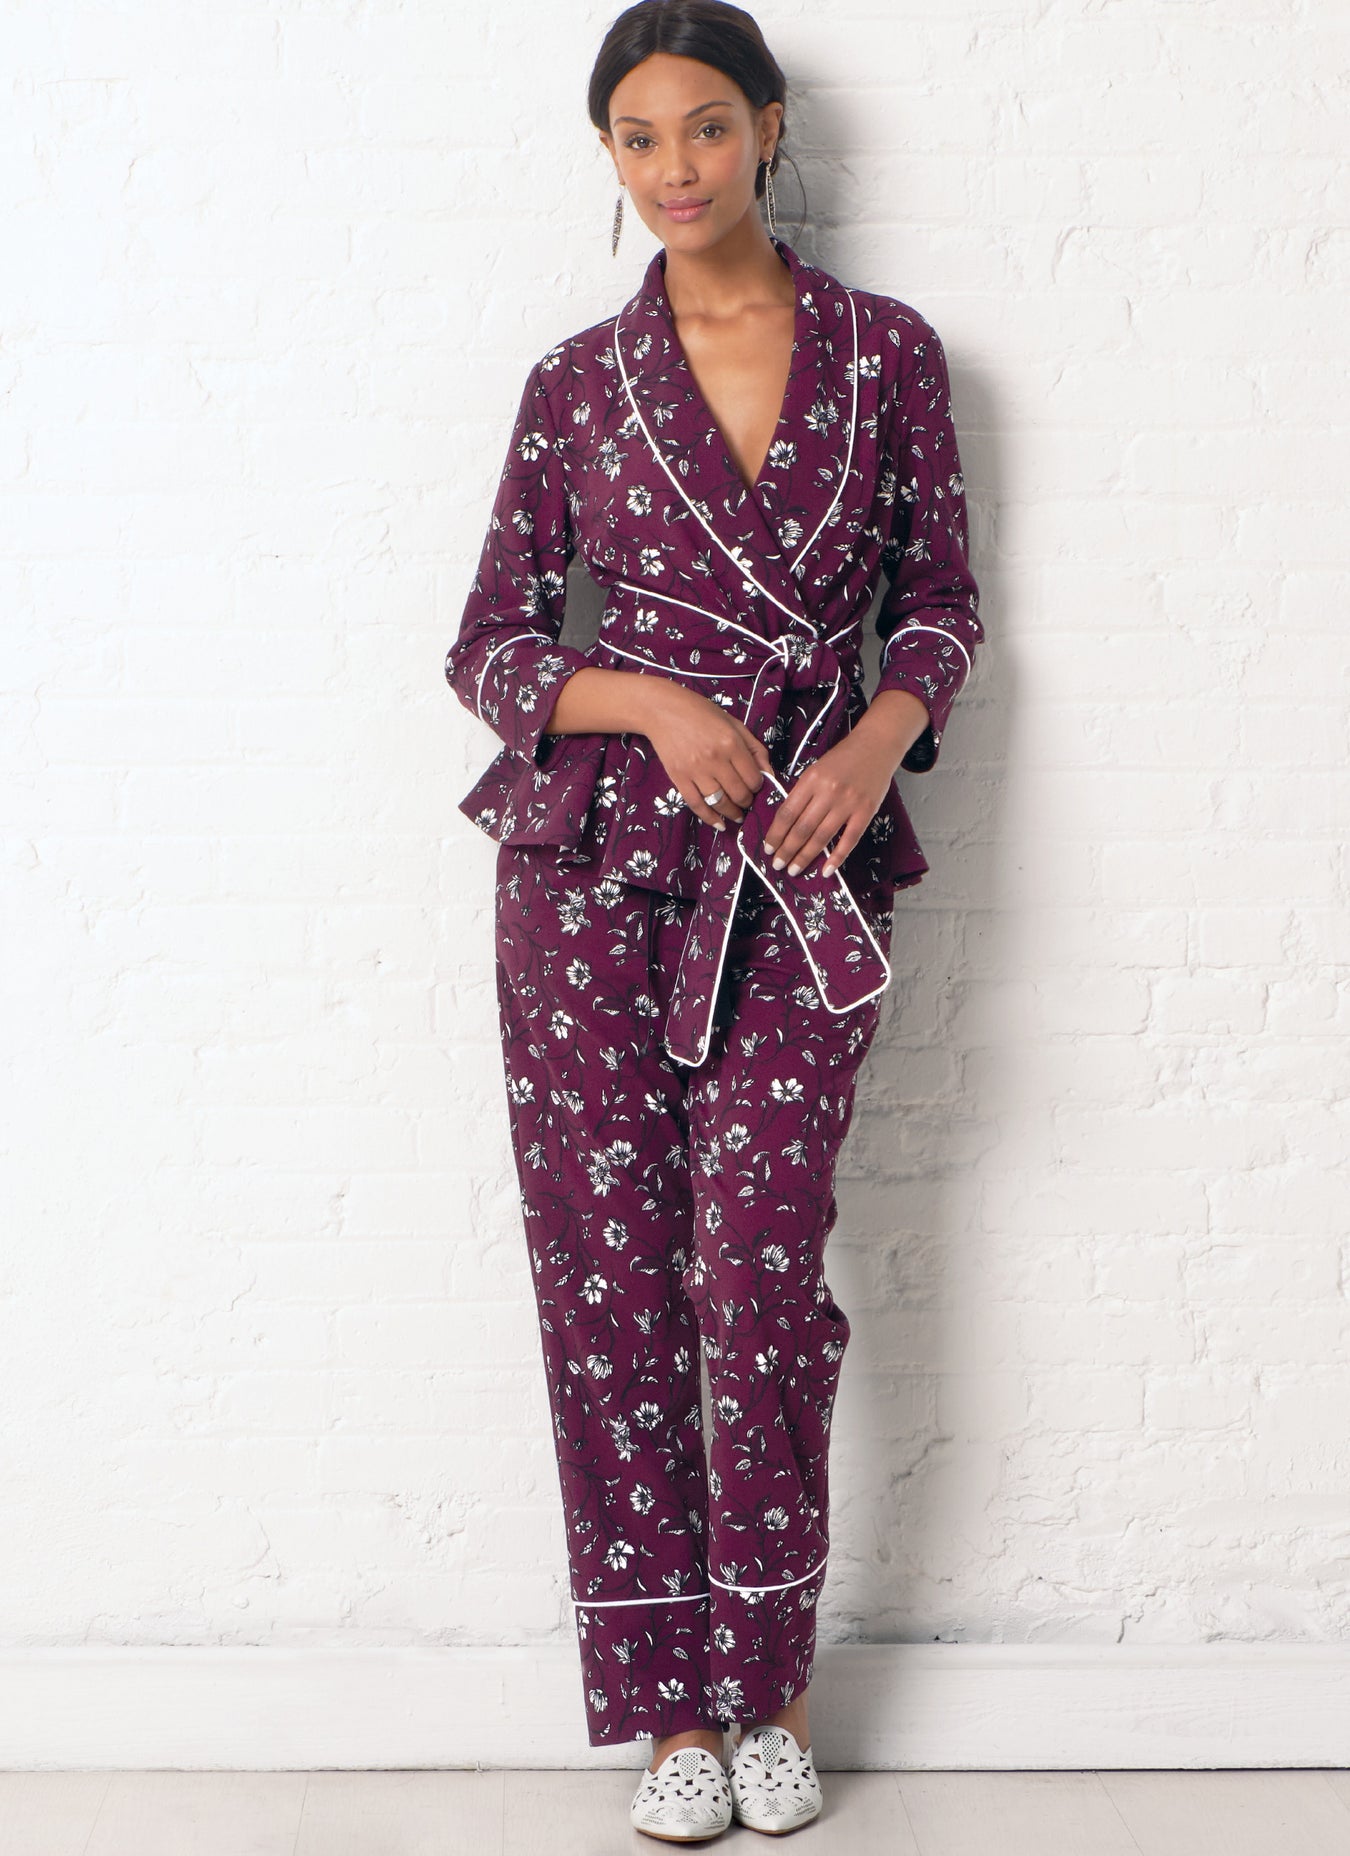 sewing patterns for pyjamas, dressing gowns and sleepwear at Jaycotts